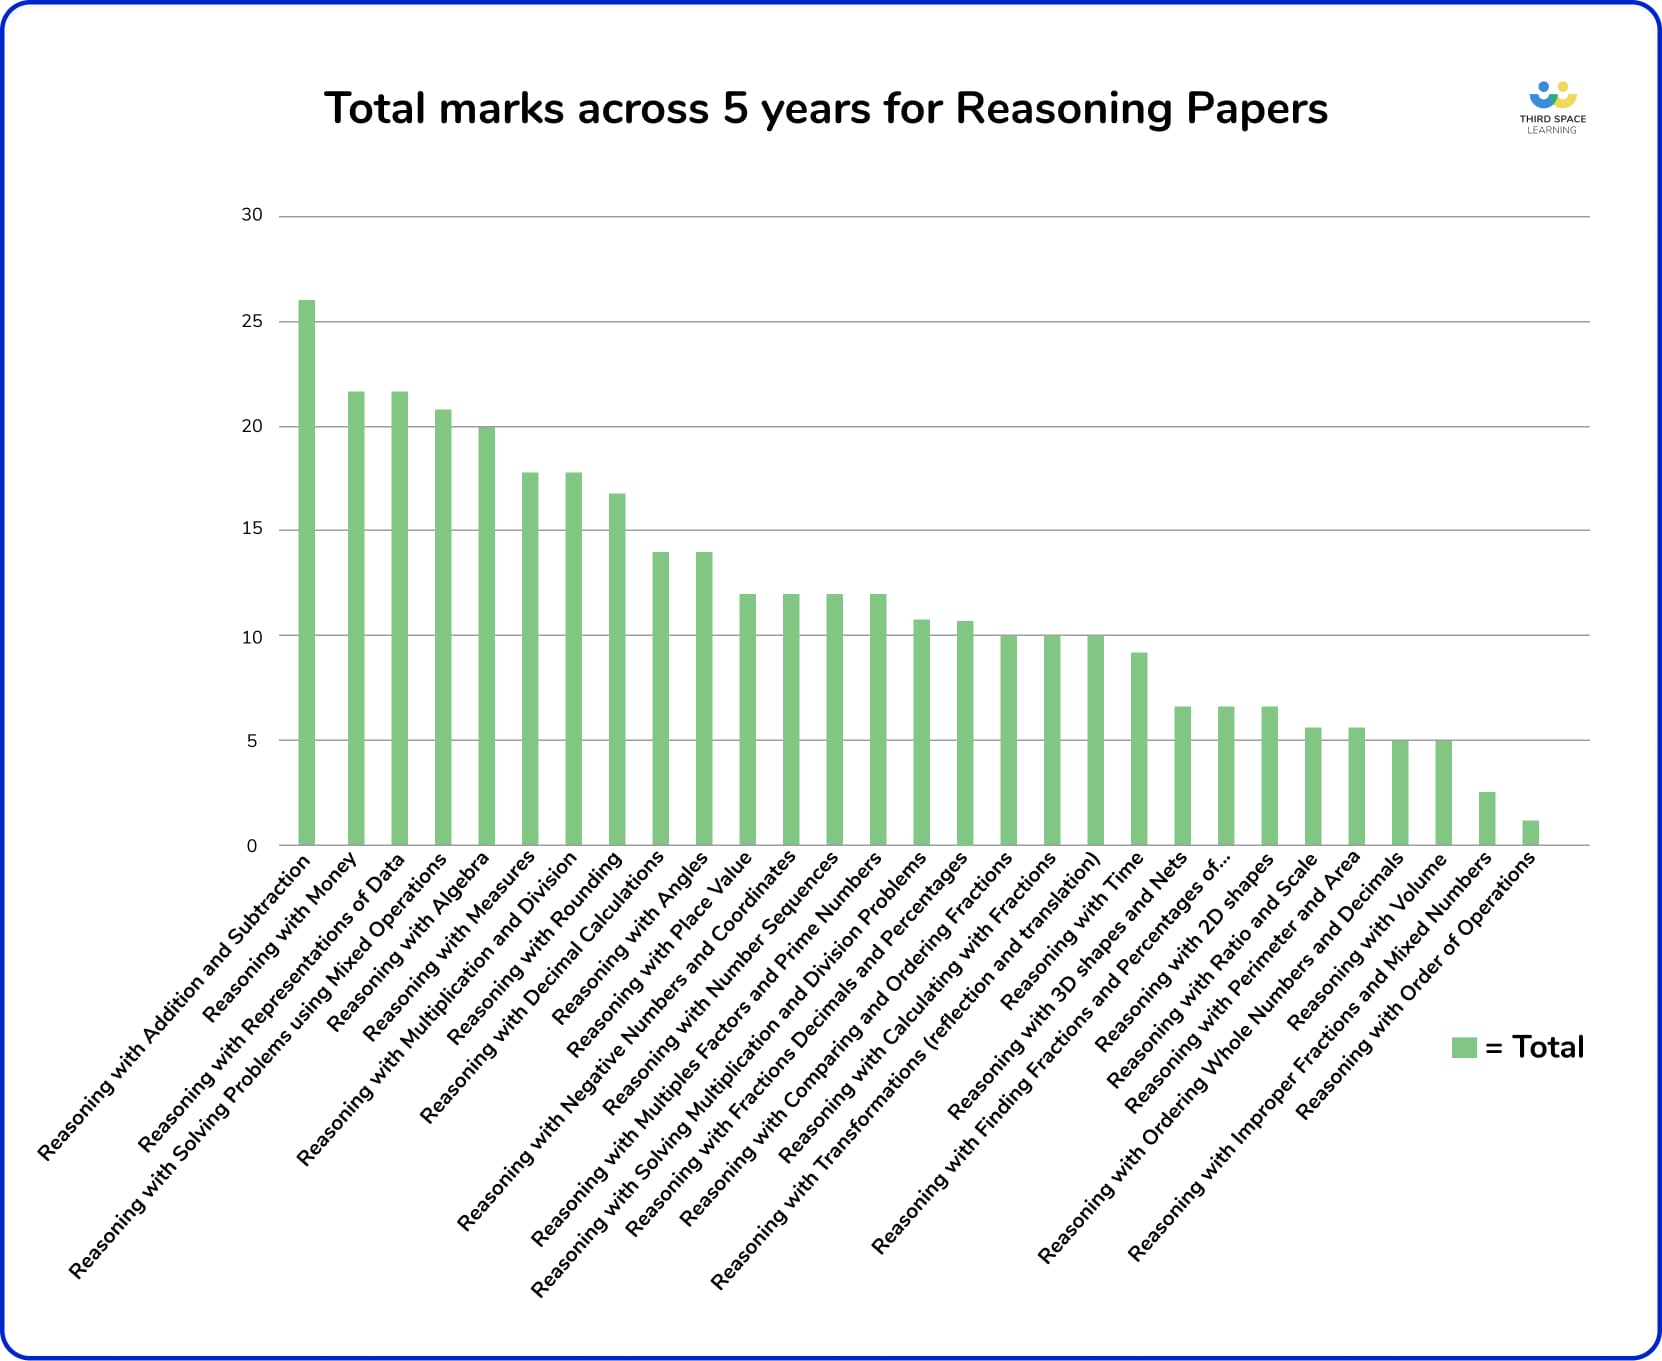 A graph to show total marks across 5 years for reasoning papers